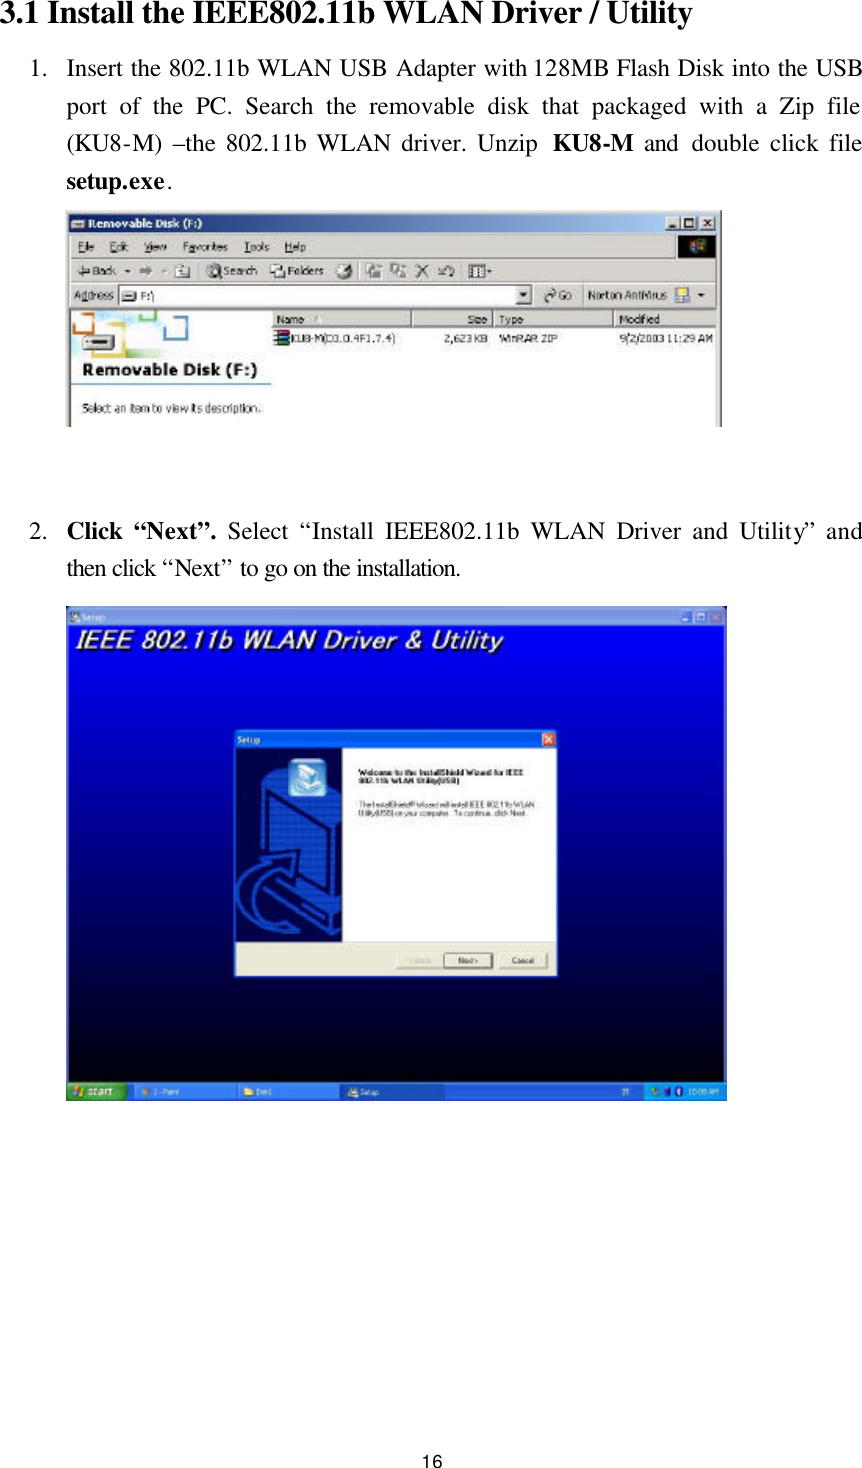  16 3.1 Install the IEEE802.11b WLAN Driver / Utility   1.  Insert the 802.11b WLAN USB Adapter with 128MB Flash Disk into the USB port of the PC. Search the removable disk that packaged with a Zip file (KU8-M)  –the 802.11b WLAN driver. Unzip  KU8-M and  double click file setup.exe.        2.  Click  “Next”. Select “Install IEEE802.11b WLAN Driver and Utility” and then click “Next” to go on the installation.              